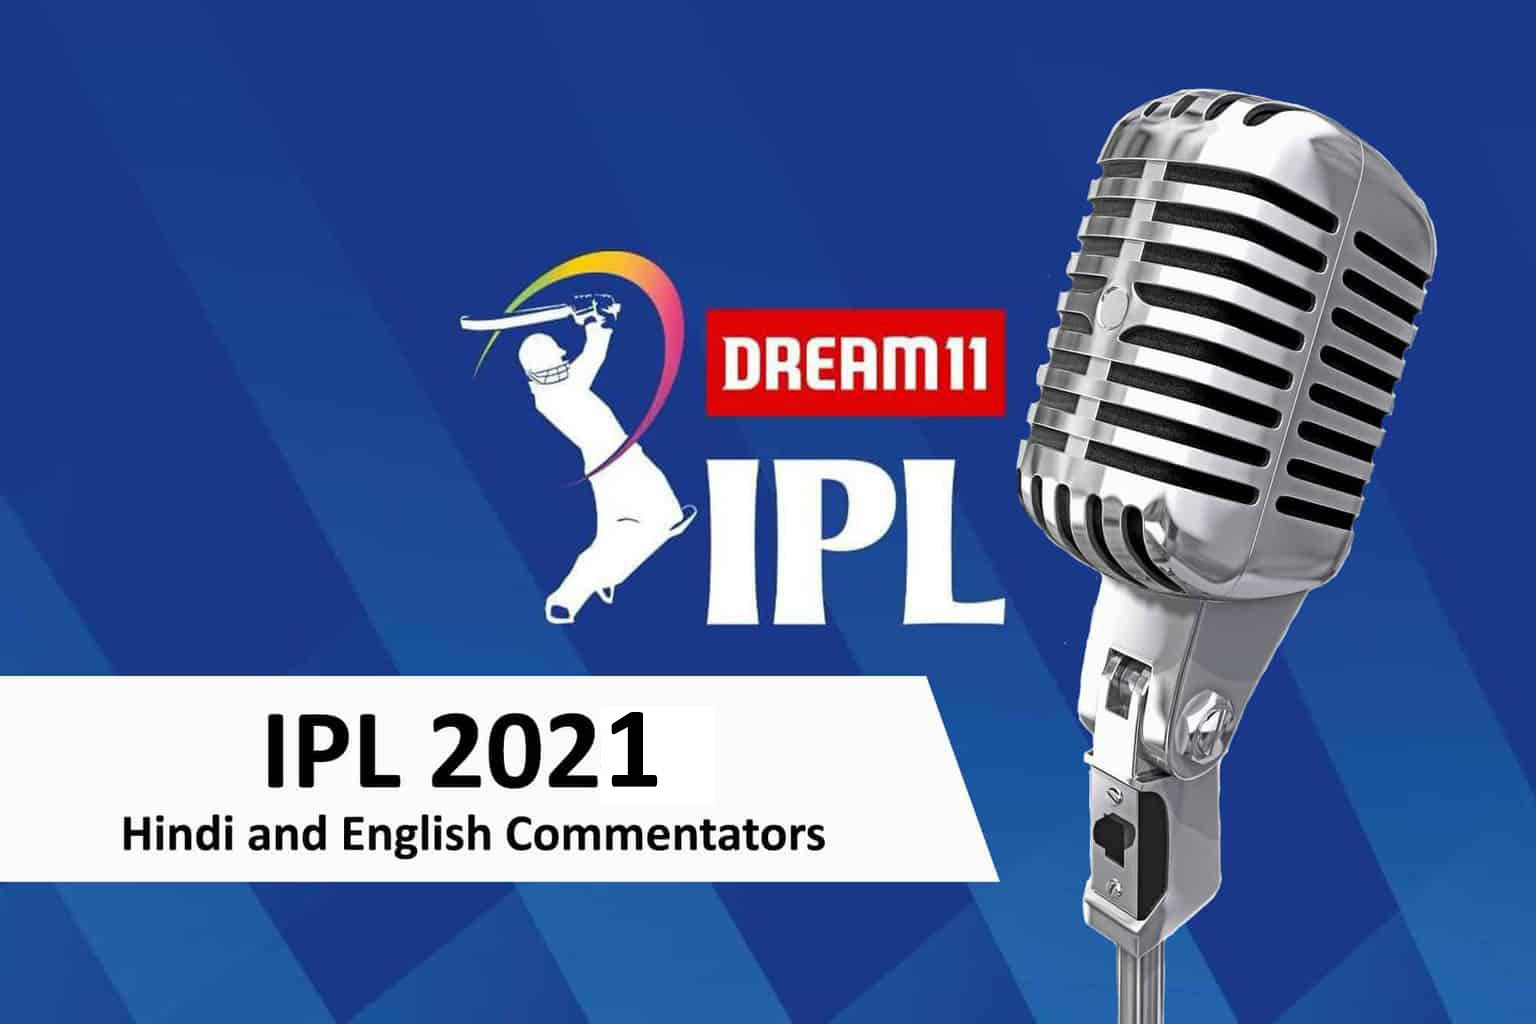 IPL 2022 Commentator List for Hindi and English Commentary